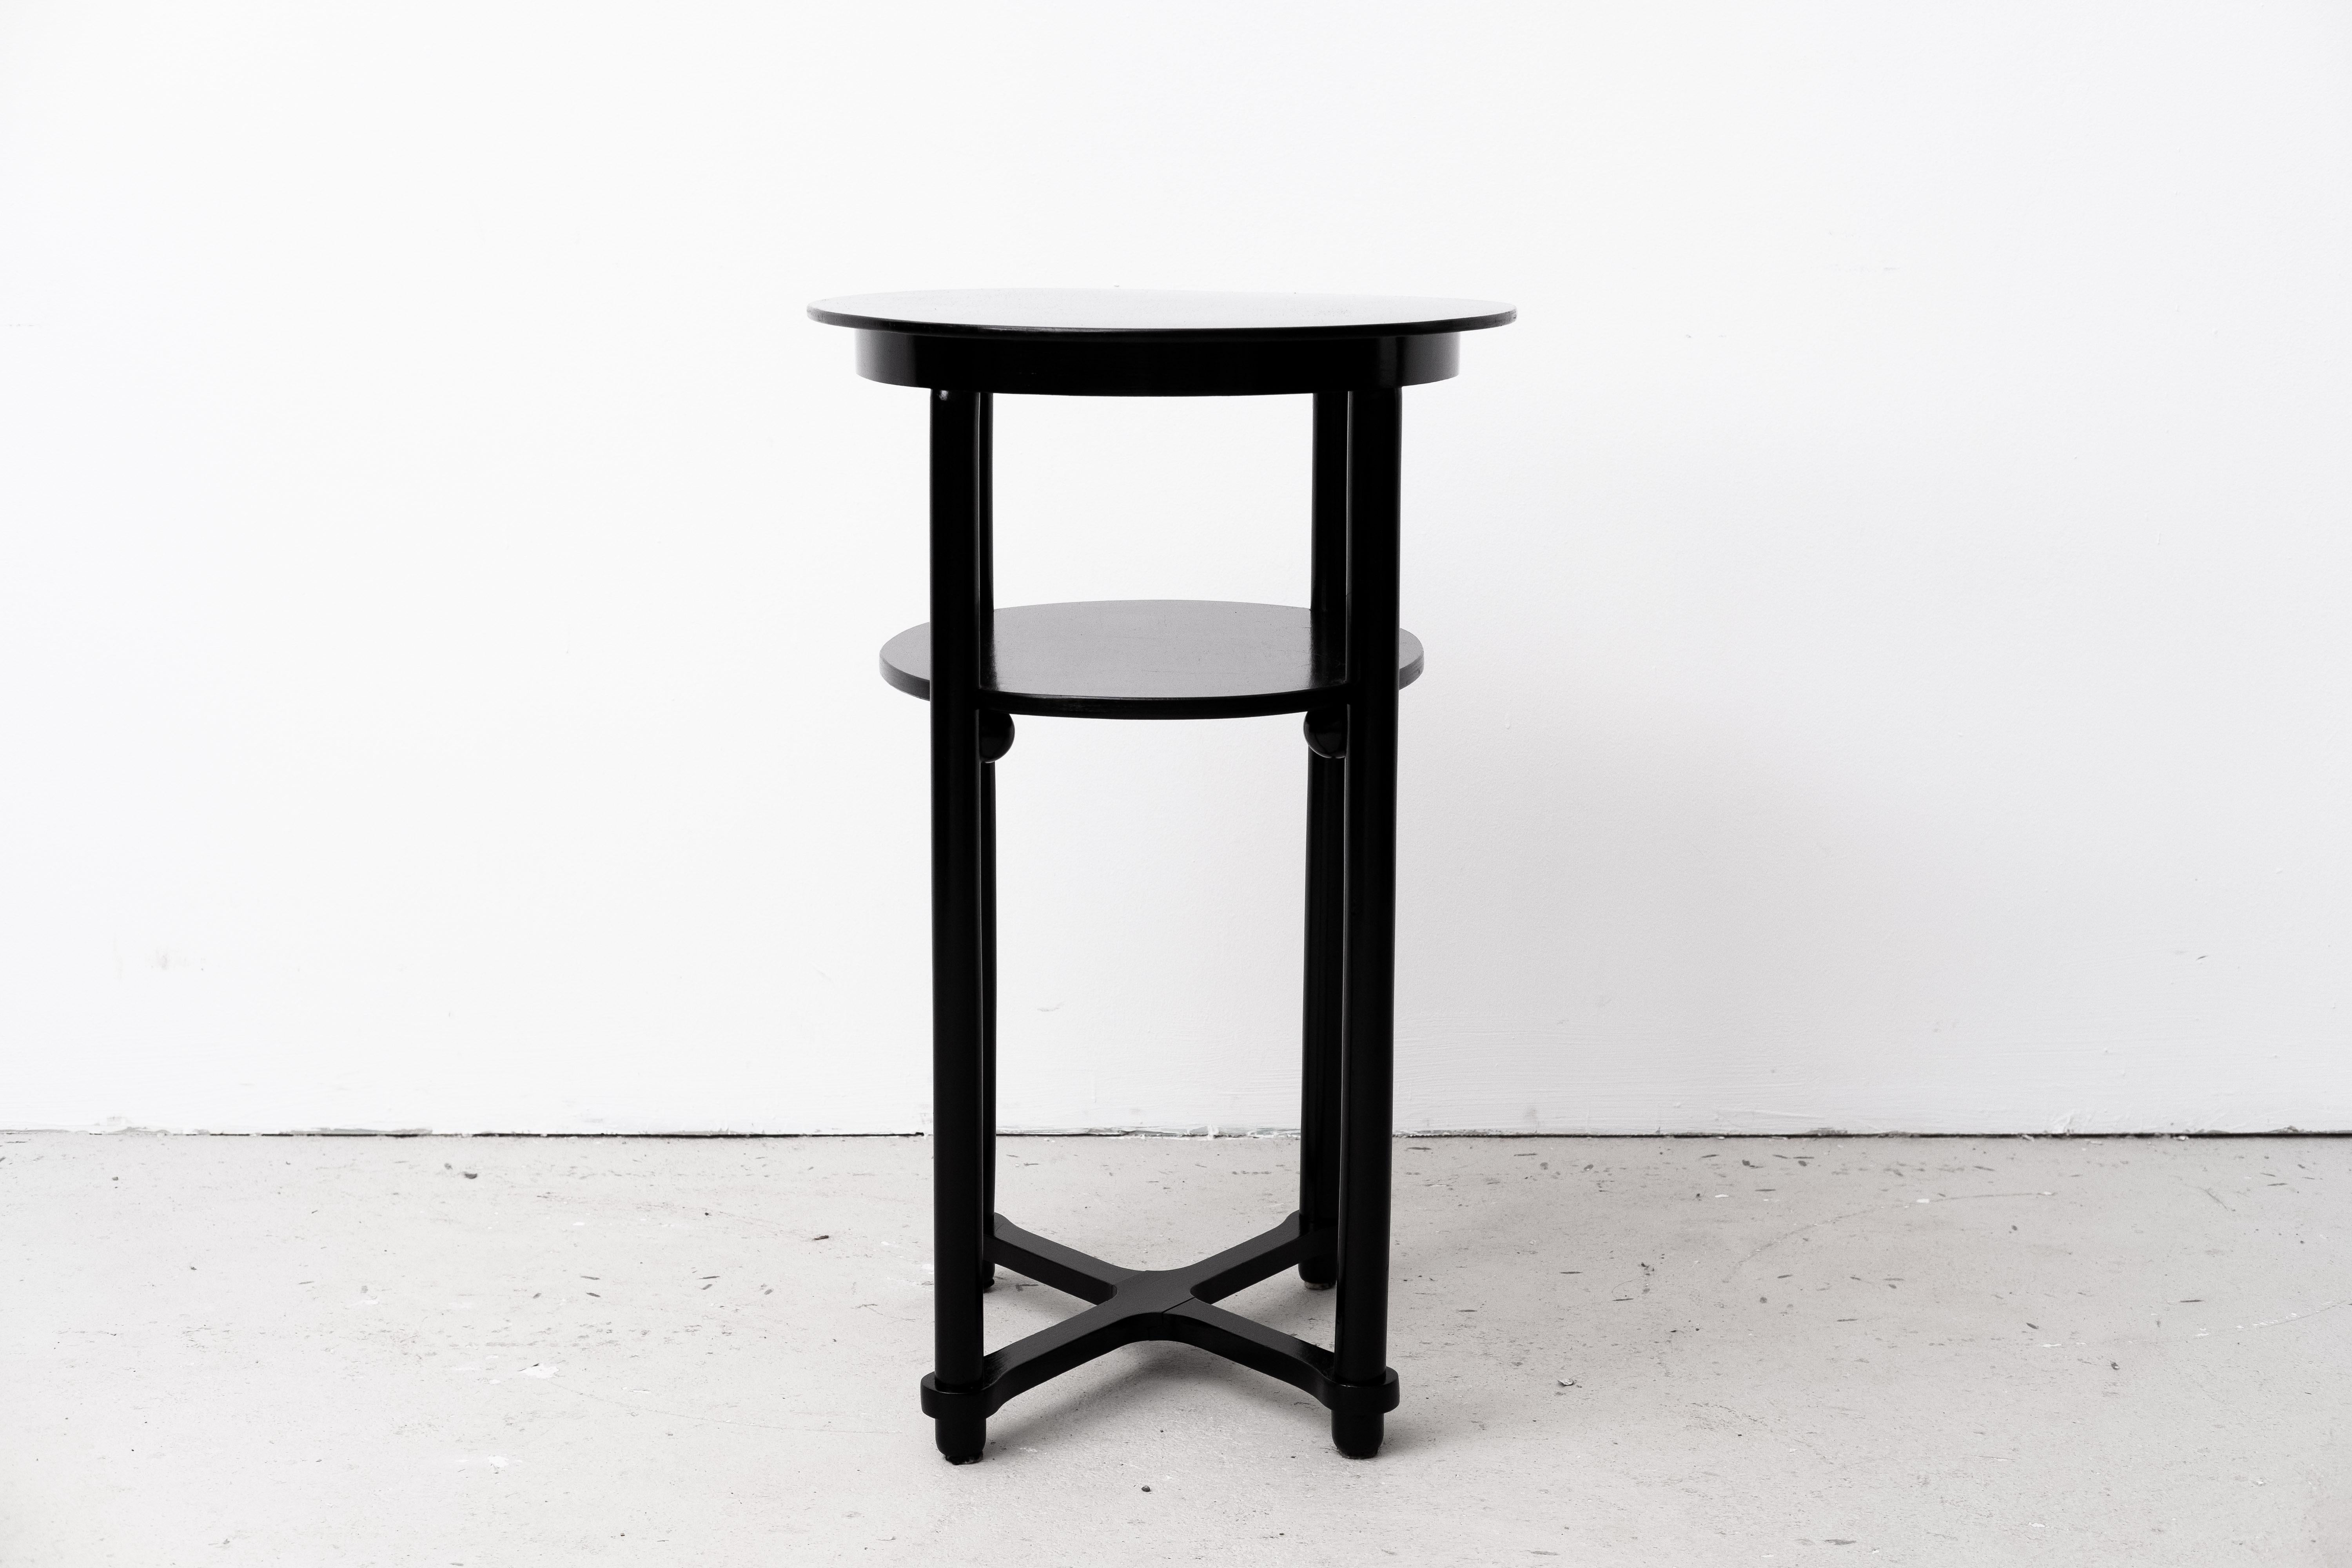 Secession Sidetable, attr. to J. Hoffmann, ex. by Fischel & Söhne (CZK, 1915) For Sale 9